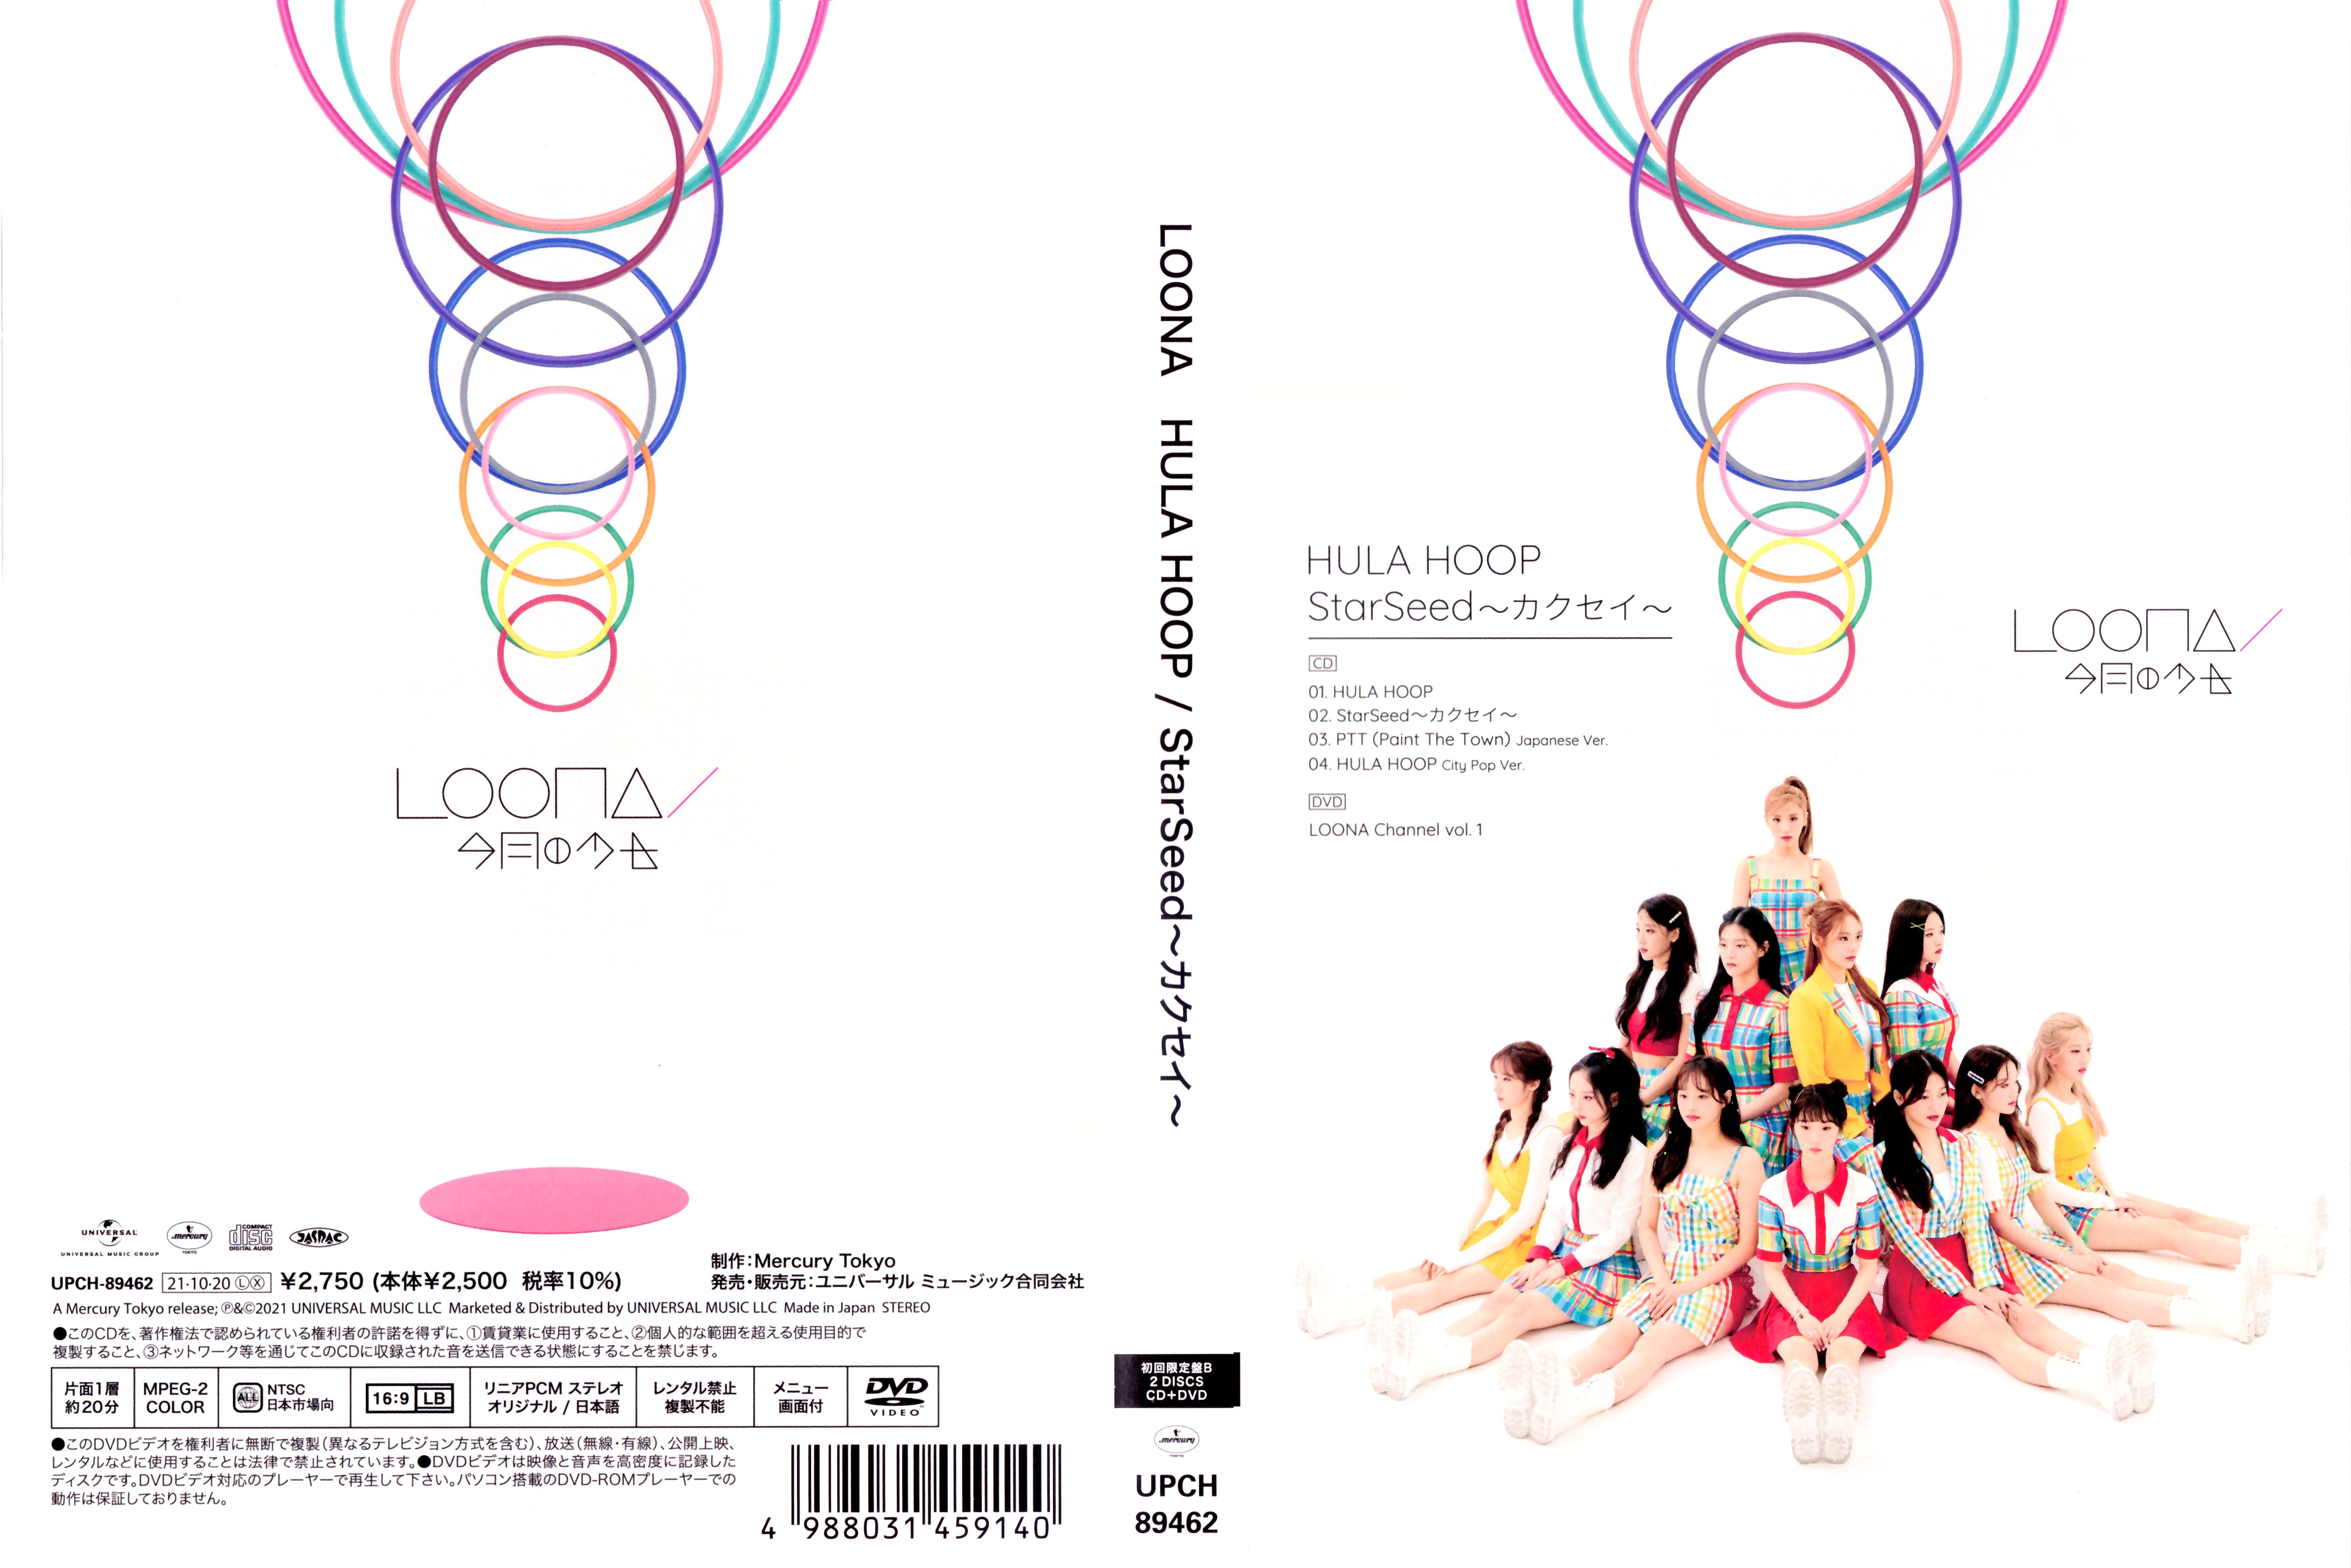 LOONA - 'Hula Hoop' (STANDARD, LIMITED A&B Ver.) [SCANS] | kpopping